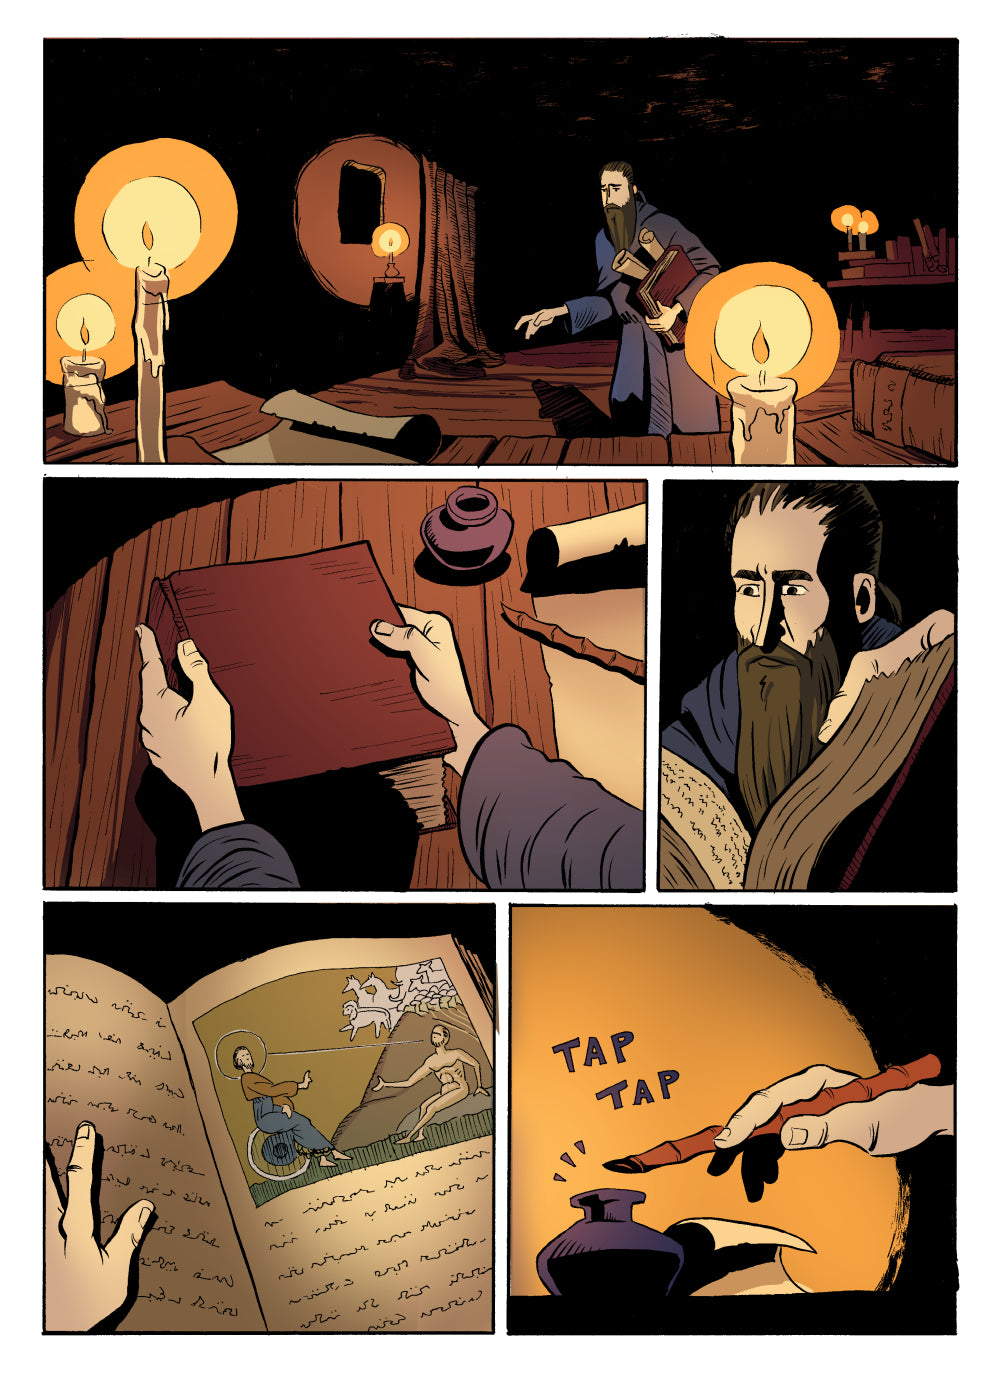 God's'Dog Book Page 3 Preview